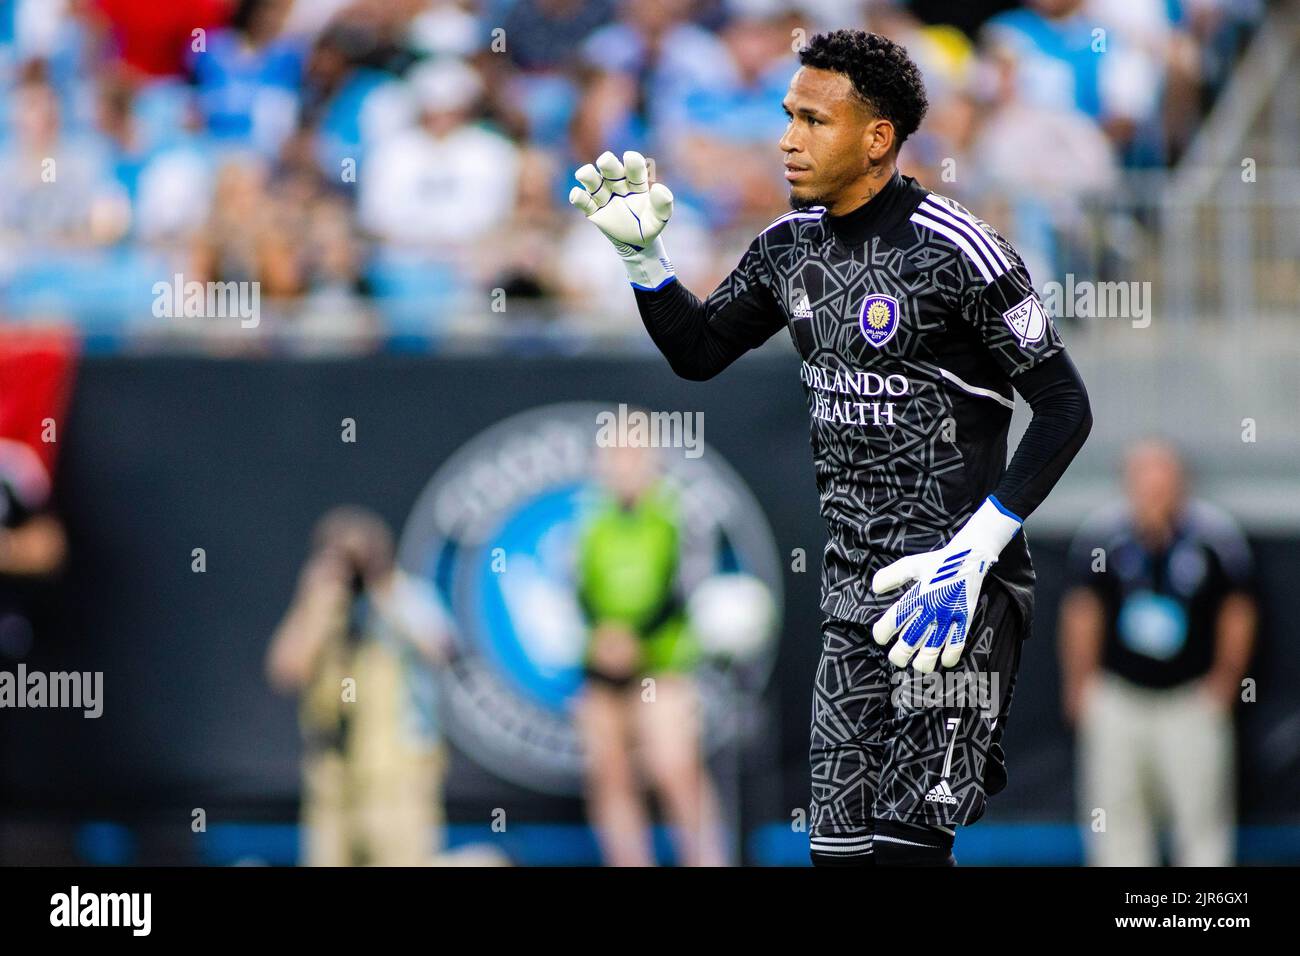 August 21, 2022: Orlando City goalkeeper Pedro Gallese (1) during the first half against the Charlotte FC in the Major League Soccer match up at Bank of America Stadium in Charlotte, NC. (Scott Kinser) Stock Photo